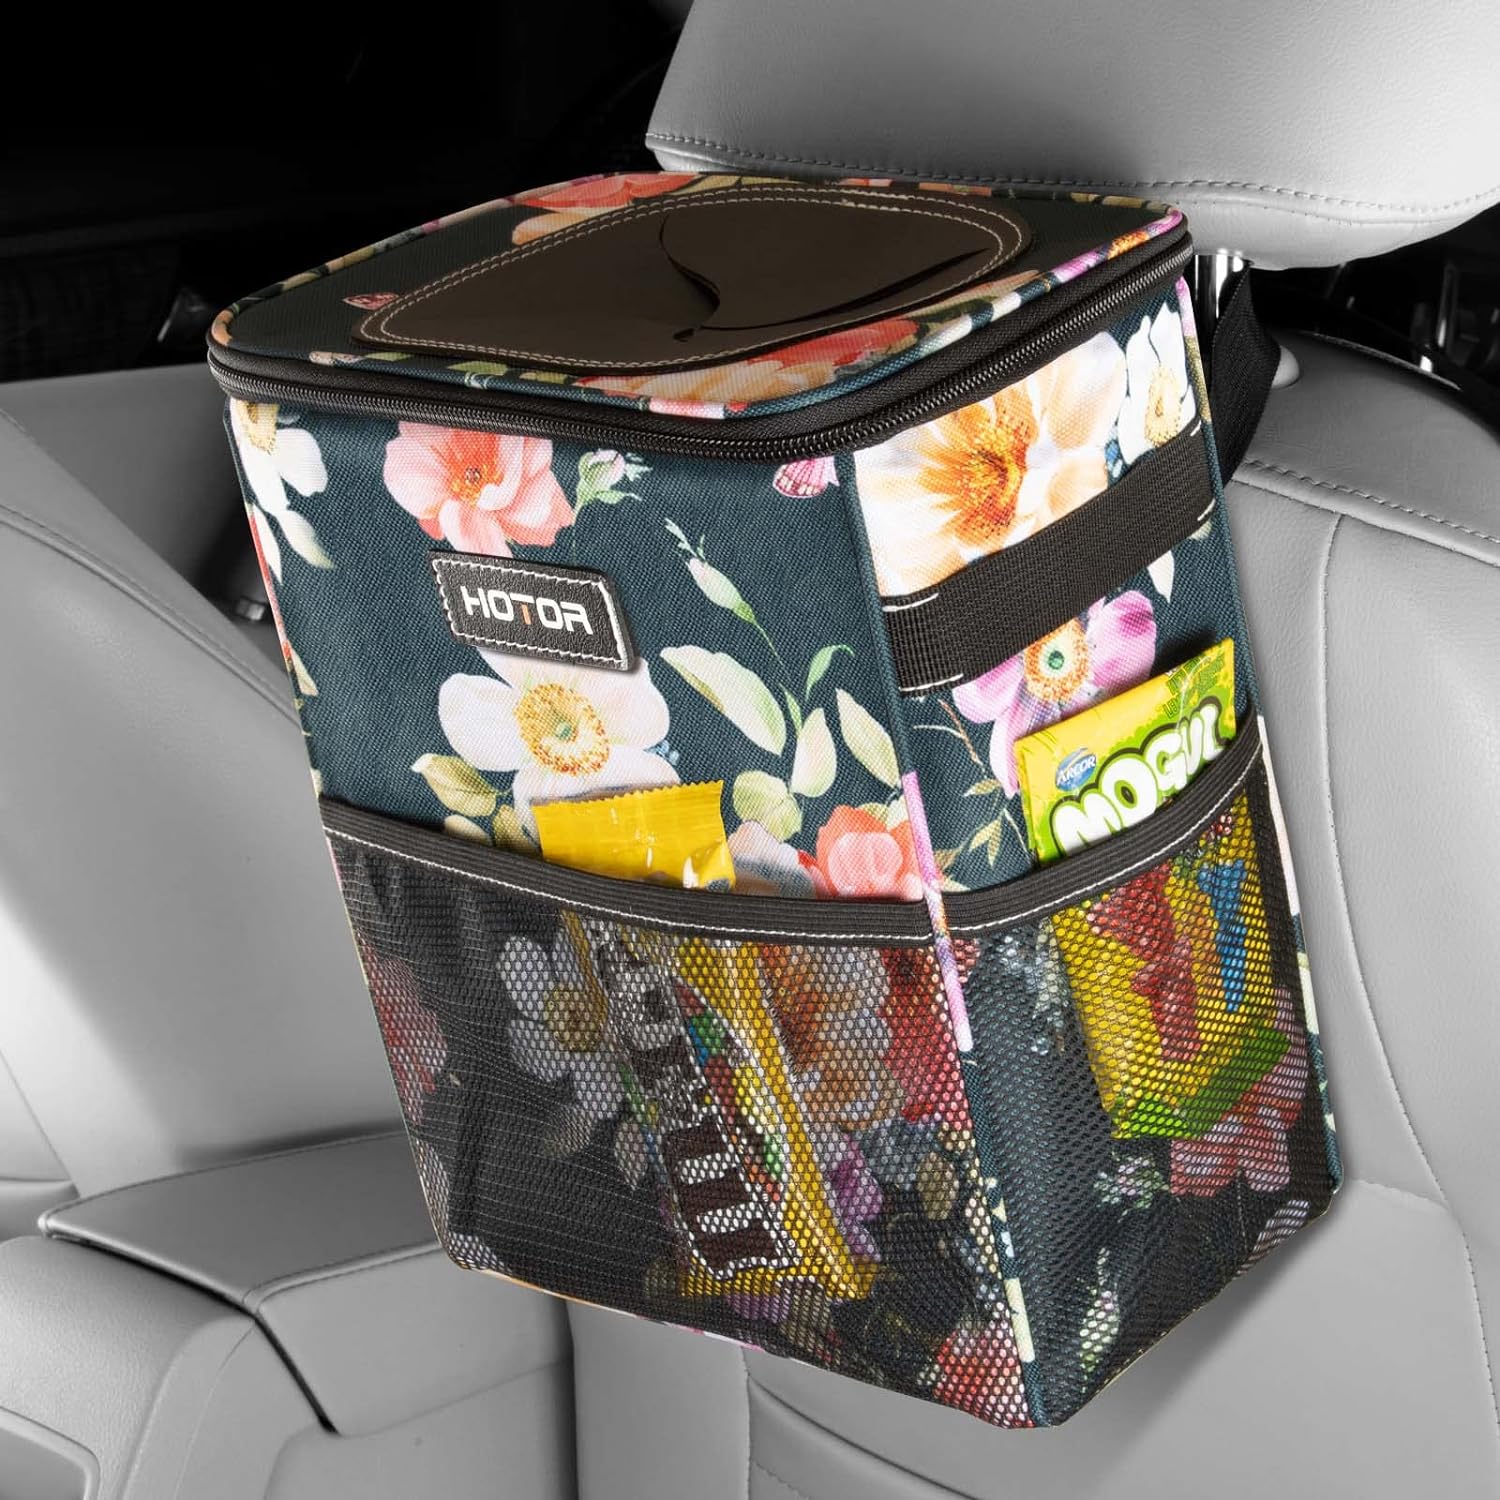 HOTOR Car Trash Can - Multifunctional Car Accessory for Interior Stuff with Compact Design, Waterproof Organizer and Storage with Adjustable Straps, Magnetic Snaps (Light Gray)